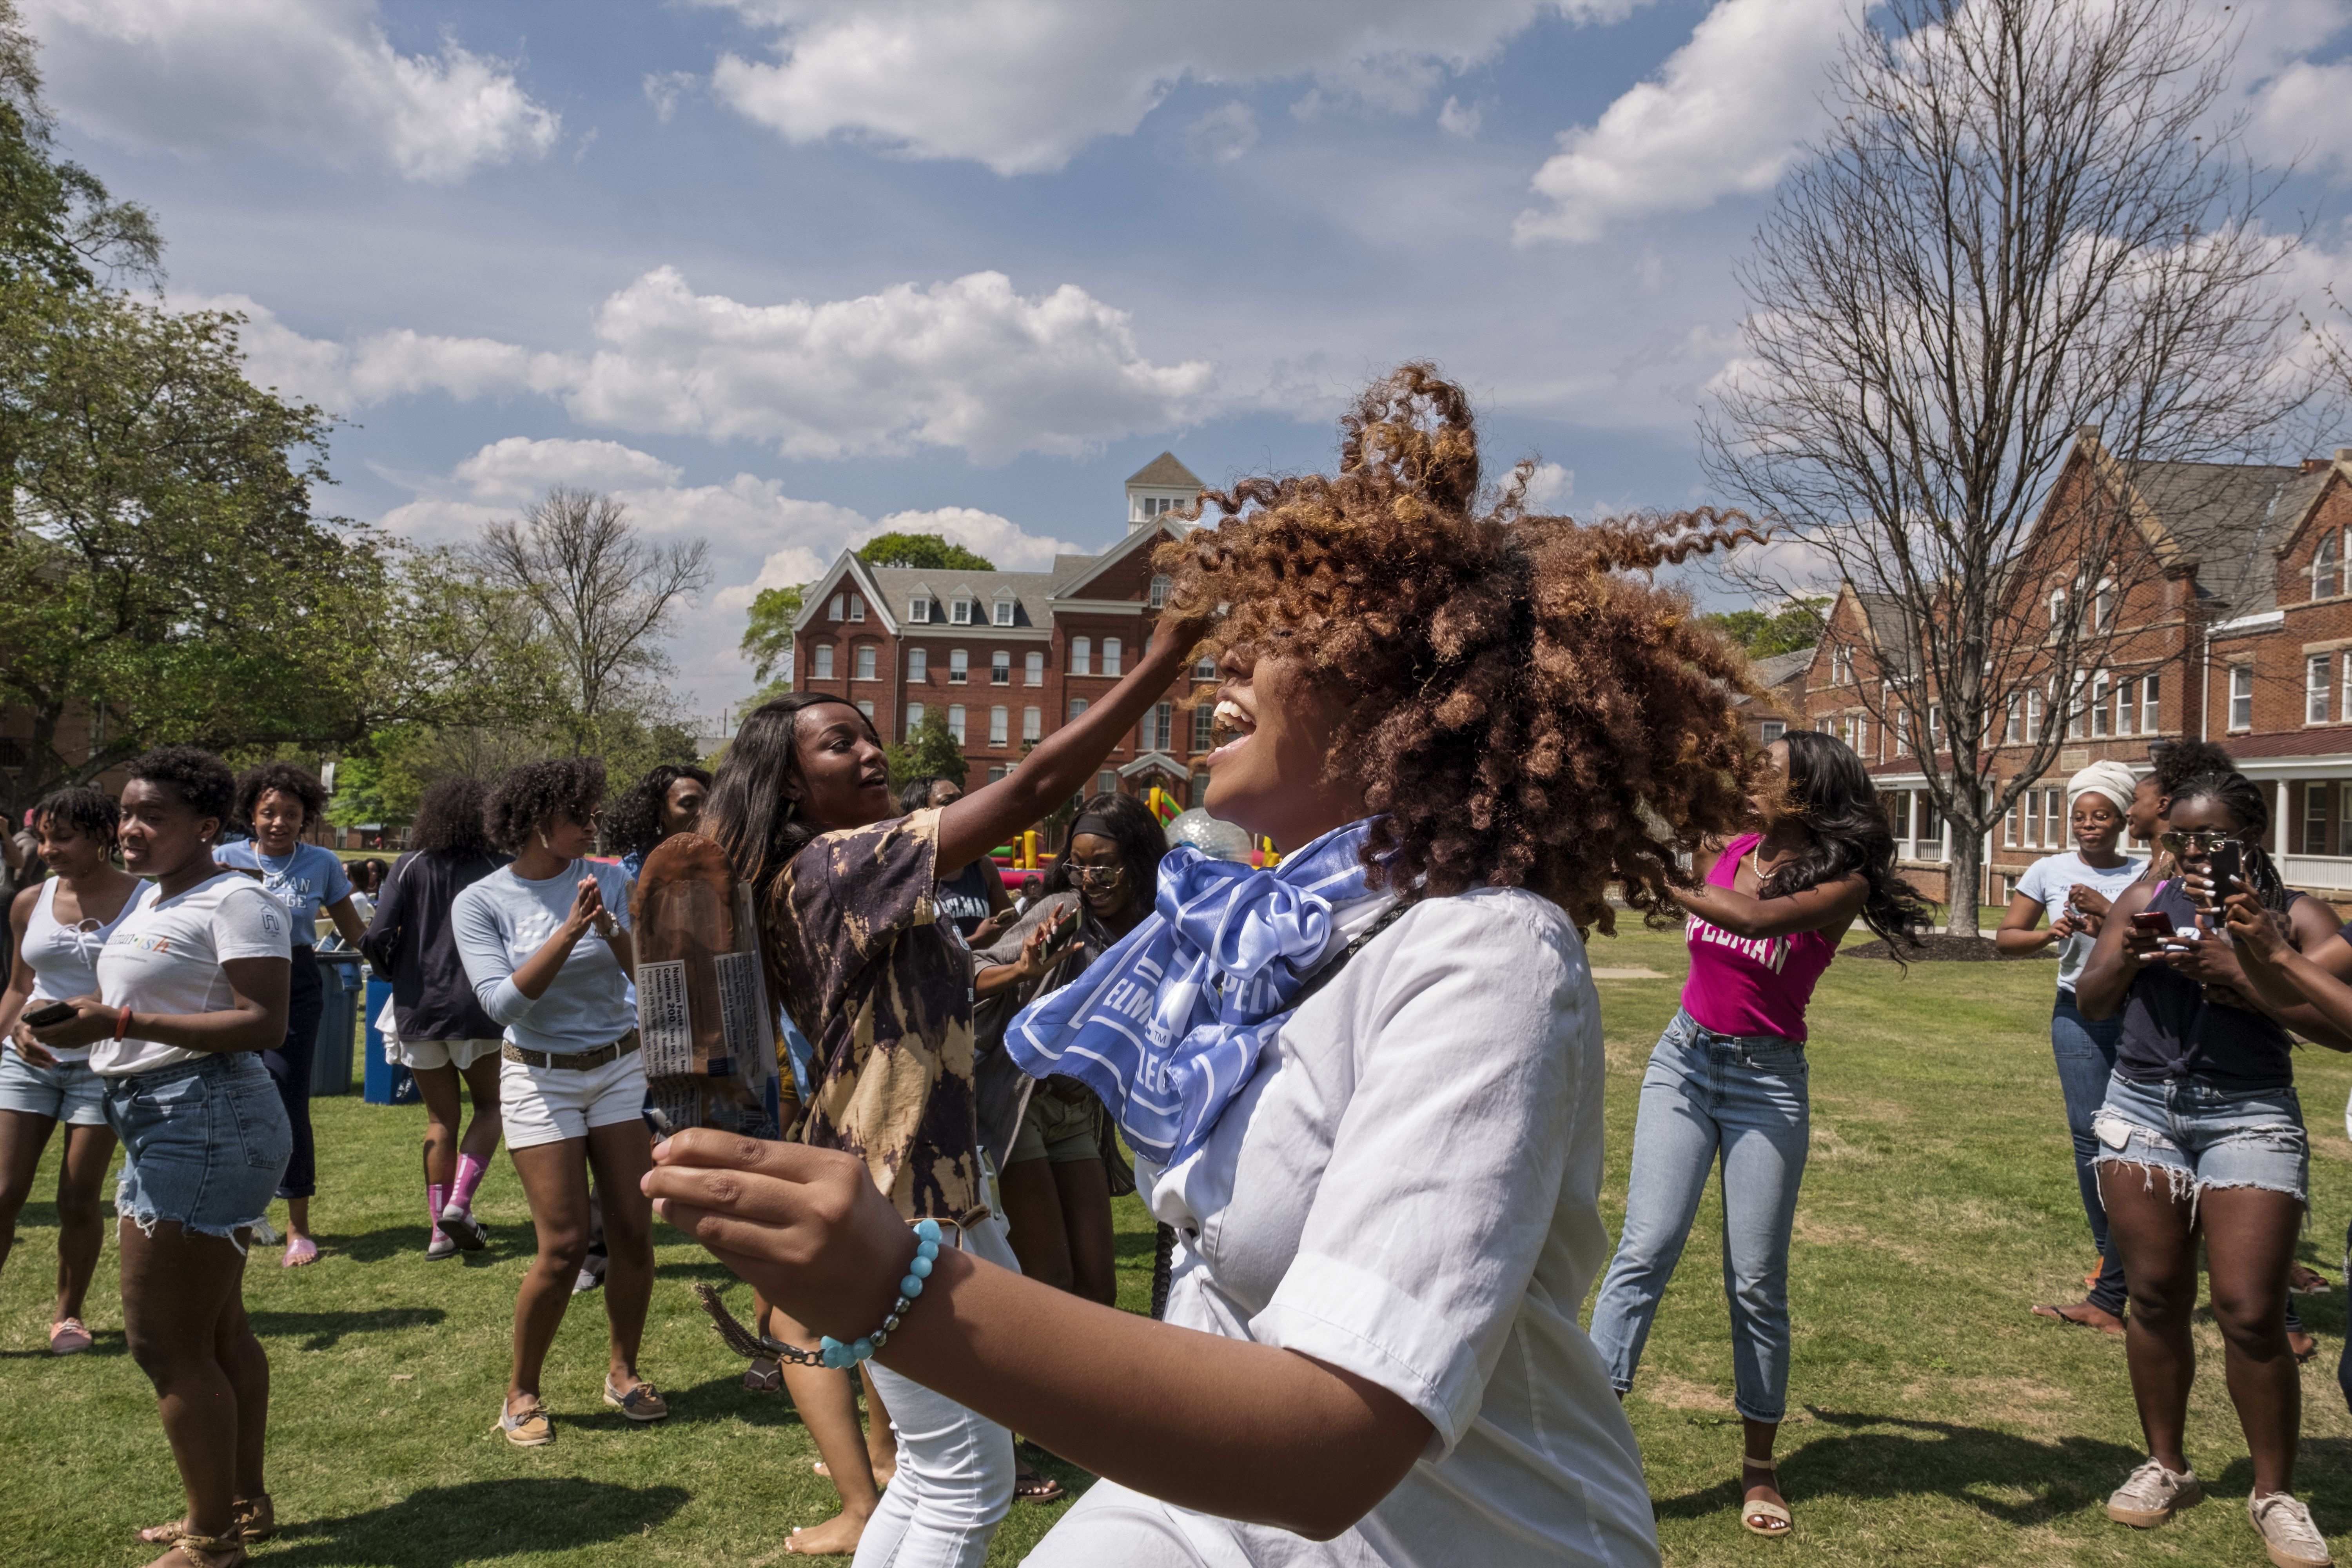 Maura Chanz Washington, a 2015 graduate of Spelman College, the top-rated historically black institution, returned to campus to commemorate Founders Day, April 11, 1881. It’s one of the most celebrated days of the academic year at this college for women. Image by Nina Robinson. United States, 2017.
